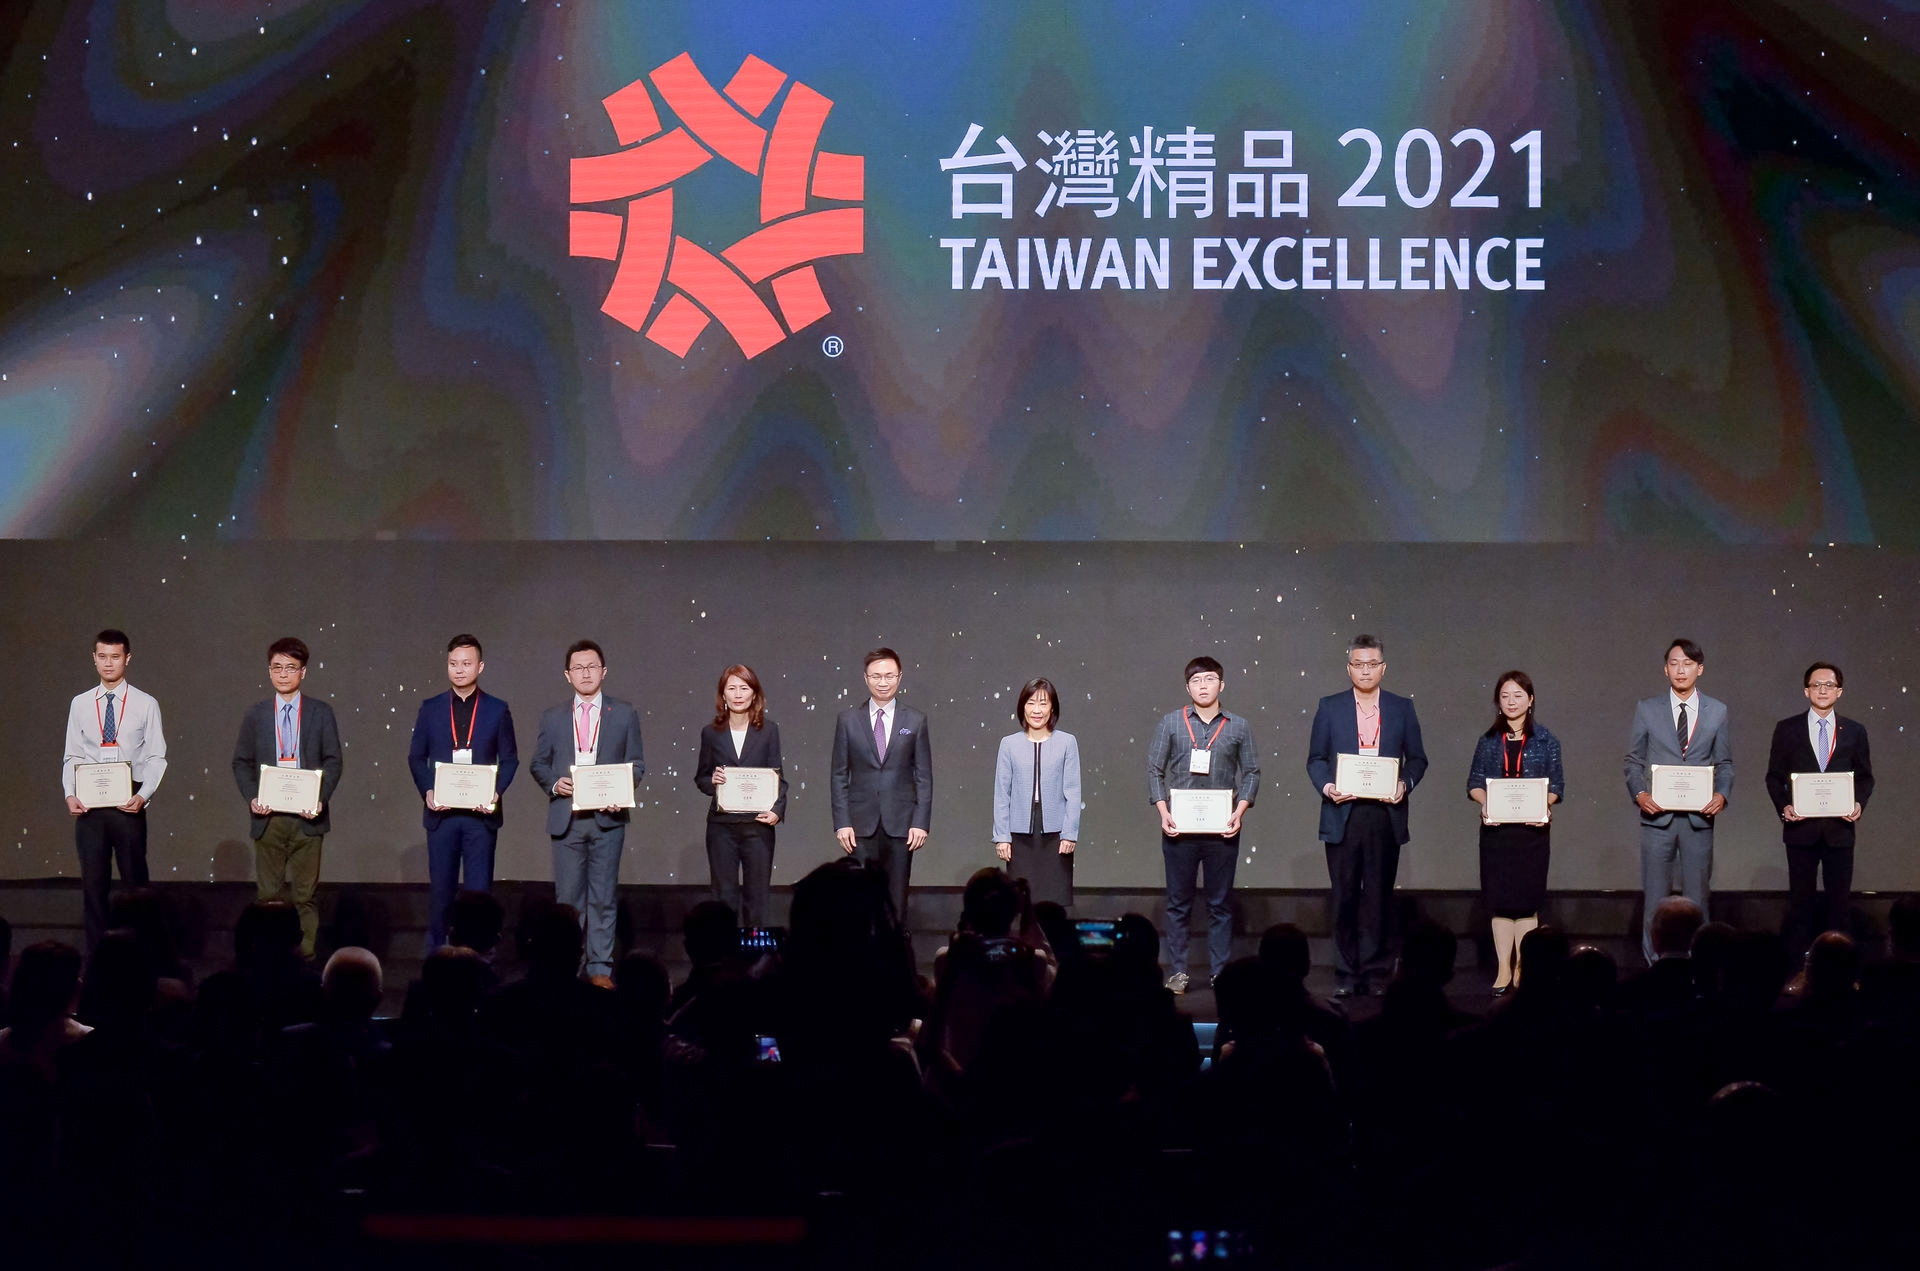 Taiwan Excellence Awards Ceremony on Nov. 25